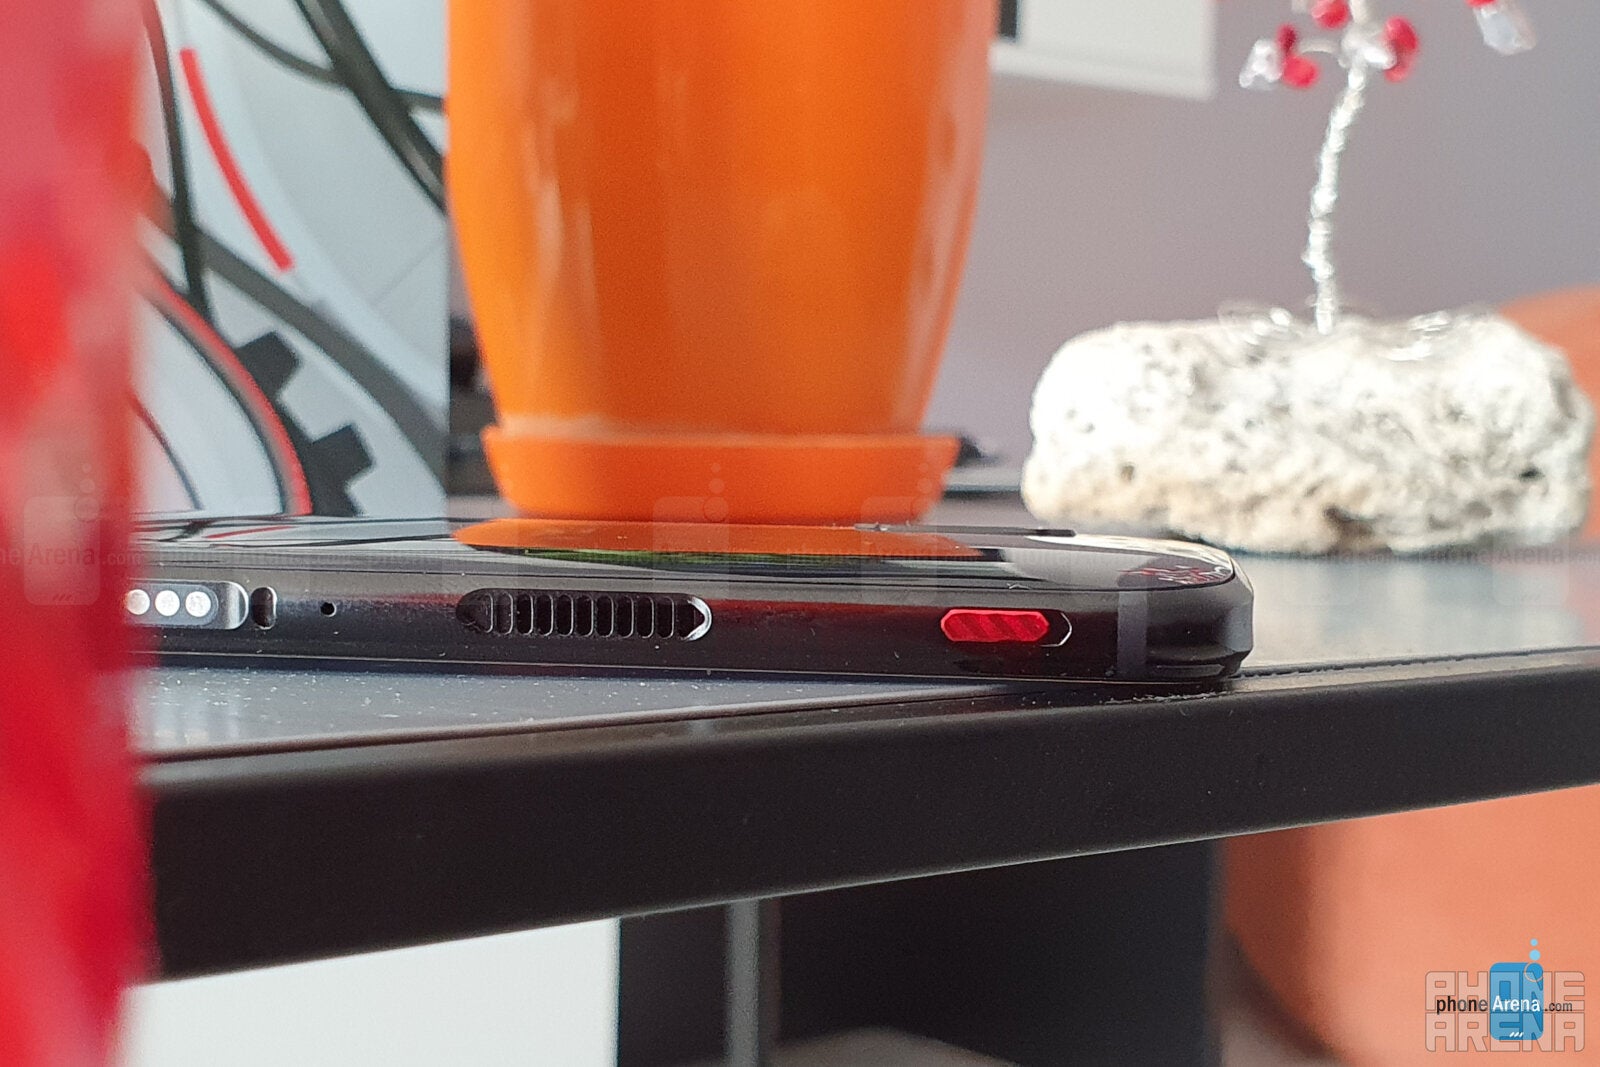 Nubia Red Magic 5G hands-on